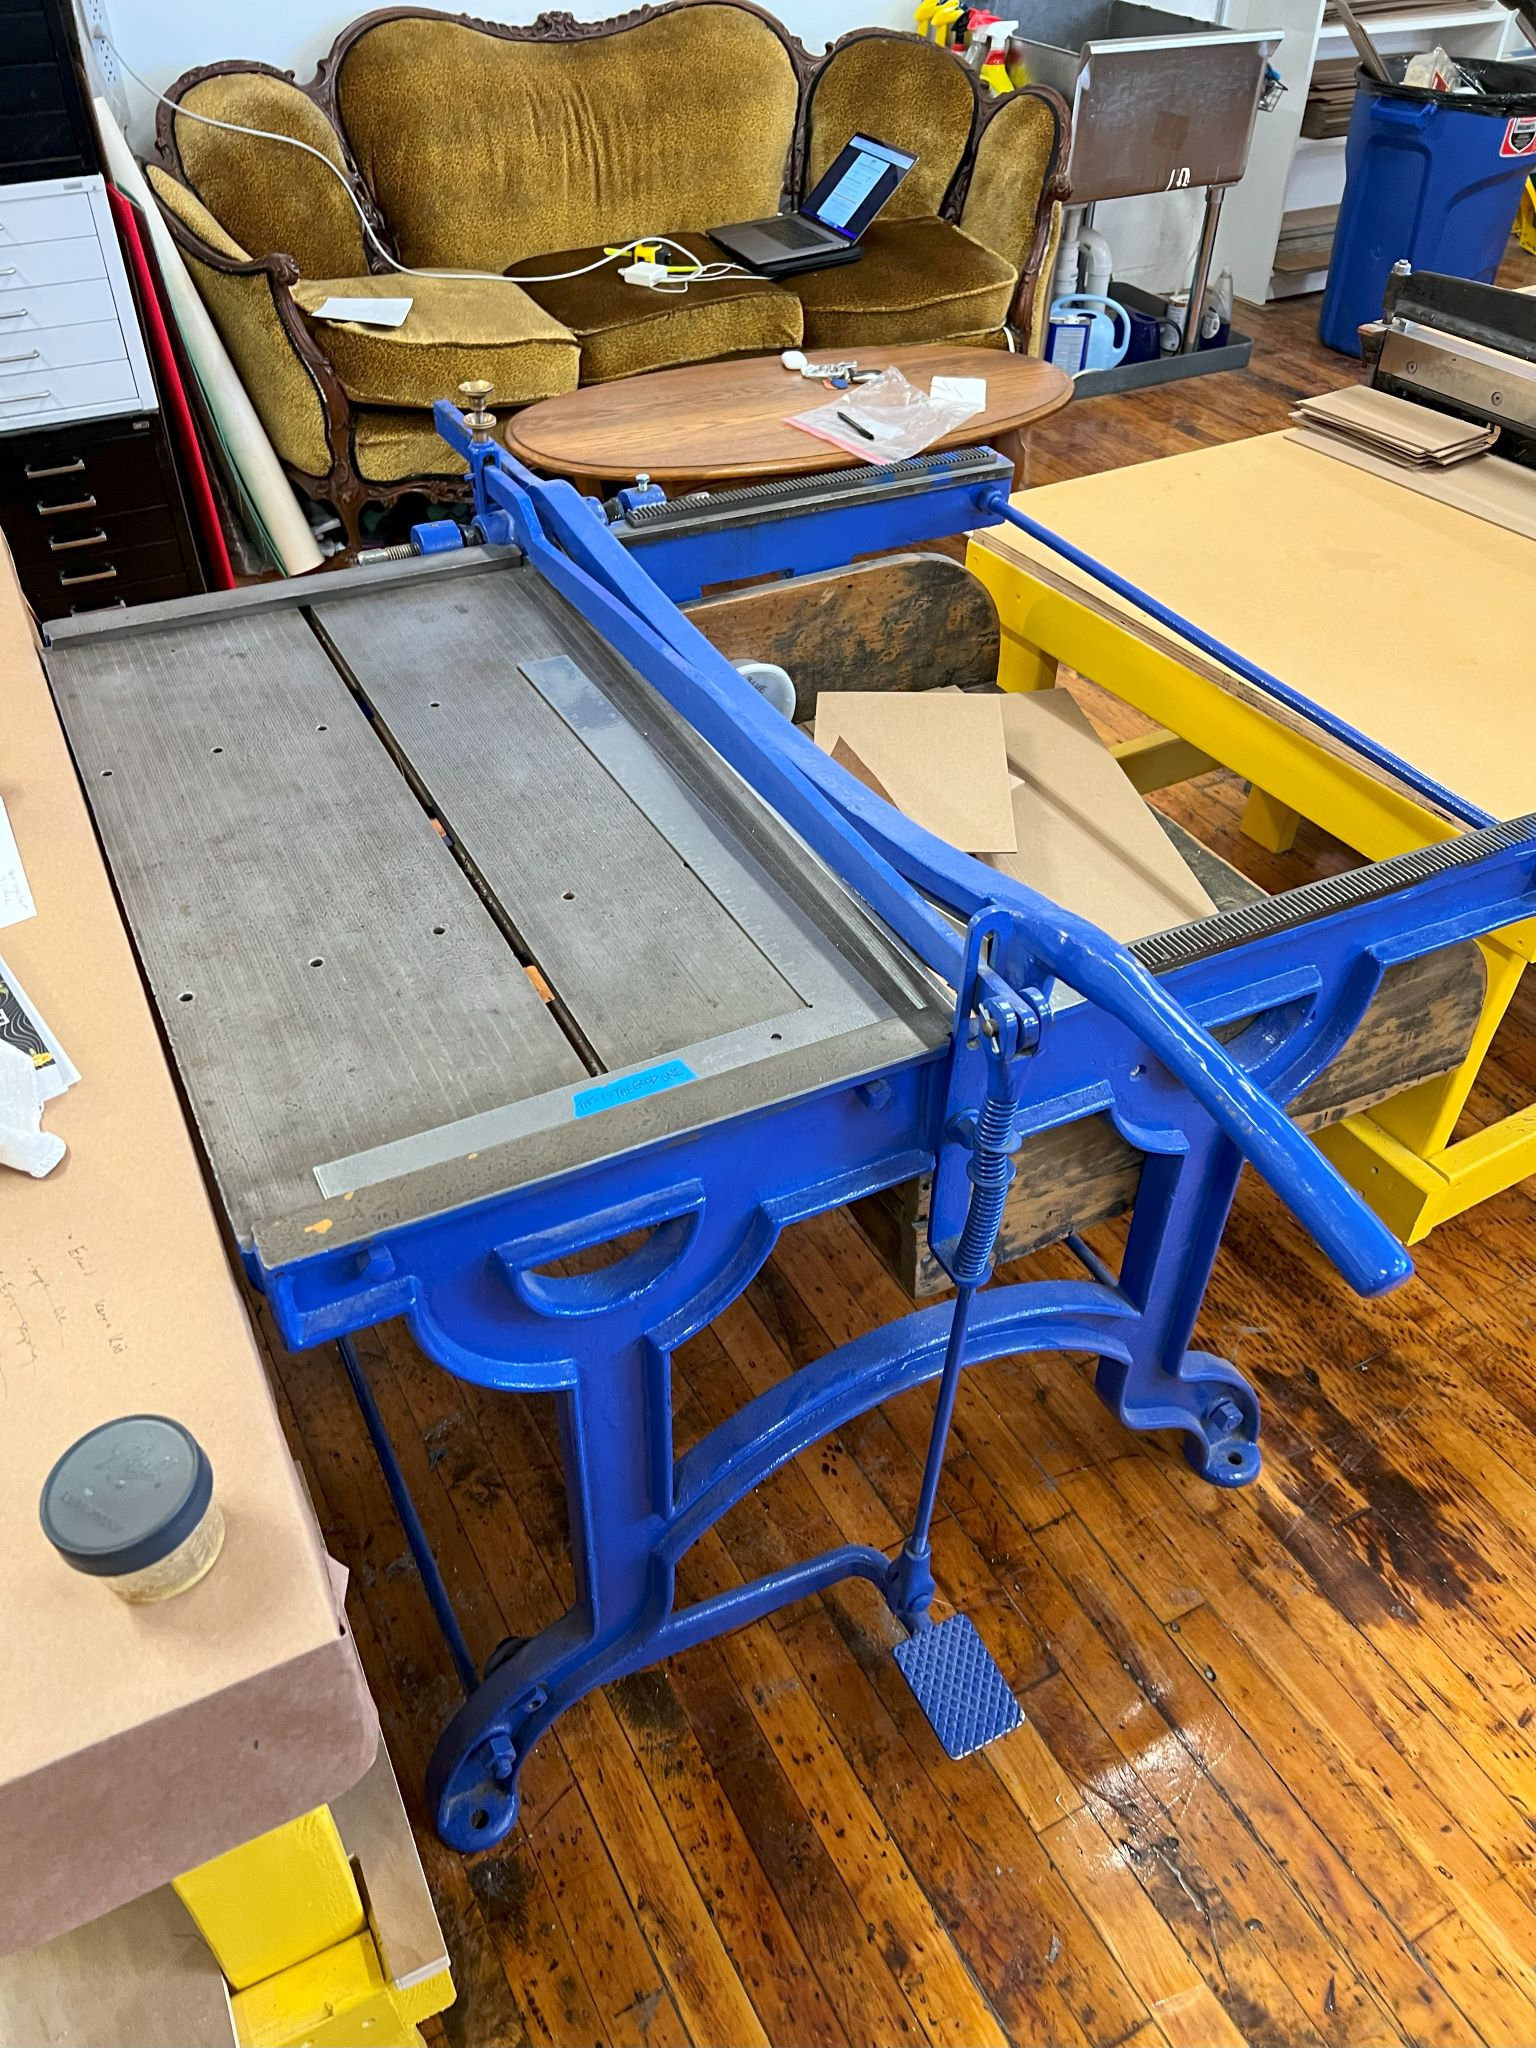 Equipment Lot: Potdevin Z27 27″ Gluer, John Jacque 40″ Wood Top Board Shear, E. P. Donnell 32.5″ Metal Top Board Shear, Challenge Hydraulic Guillotine Cutter, & Bookbinding Backing Press (Used) Item # UE-050224A